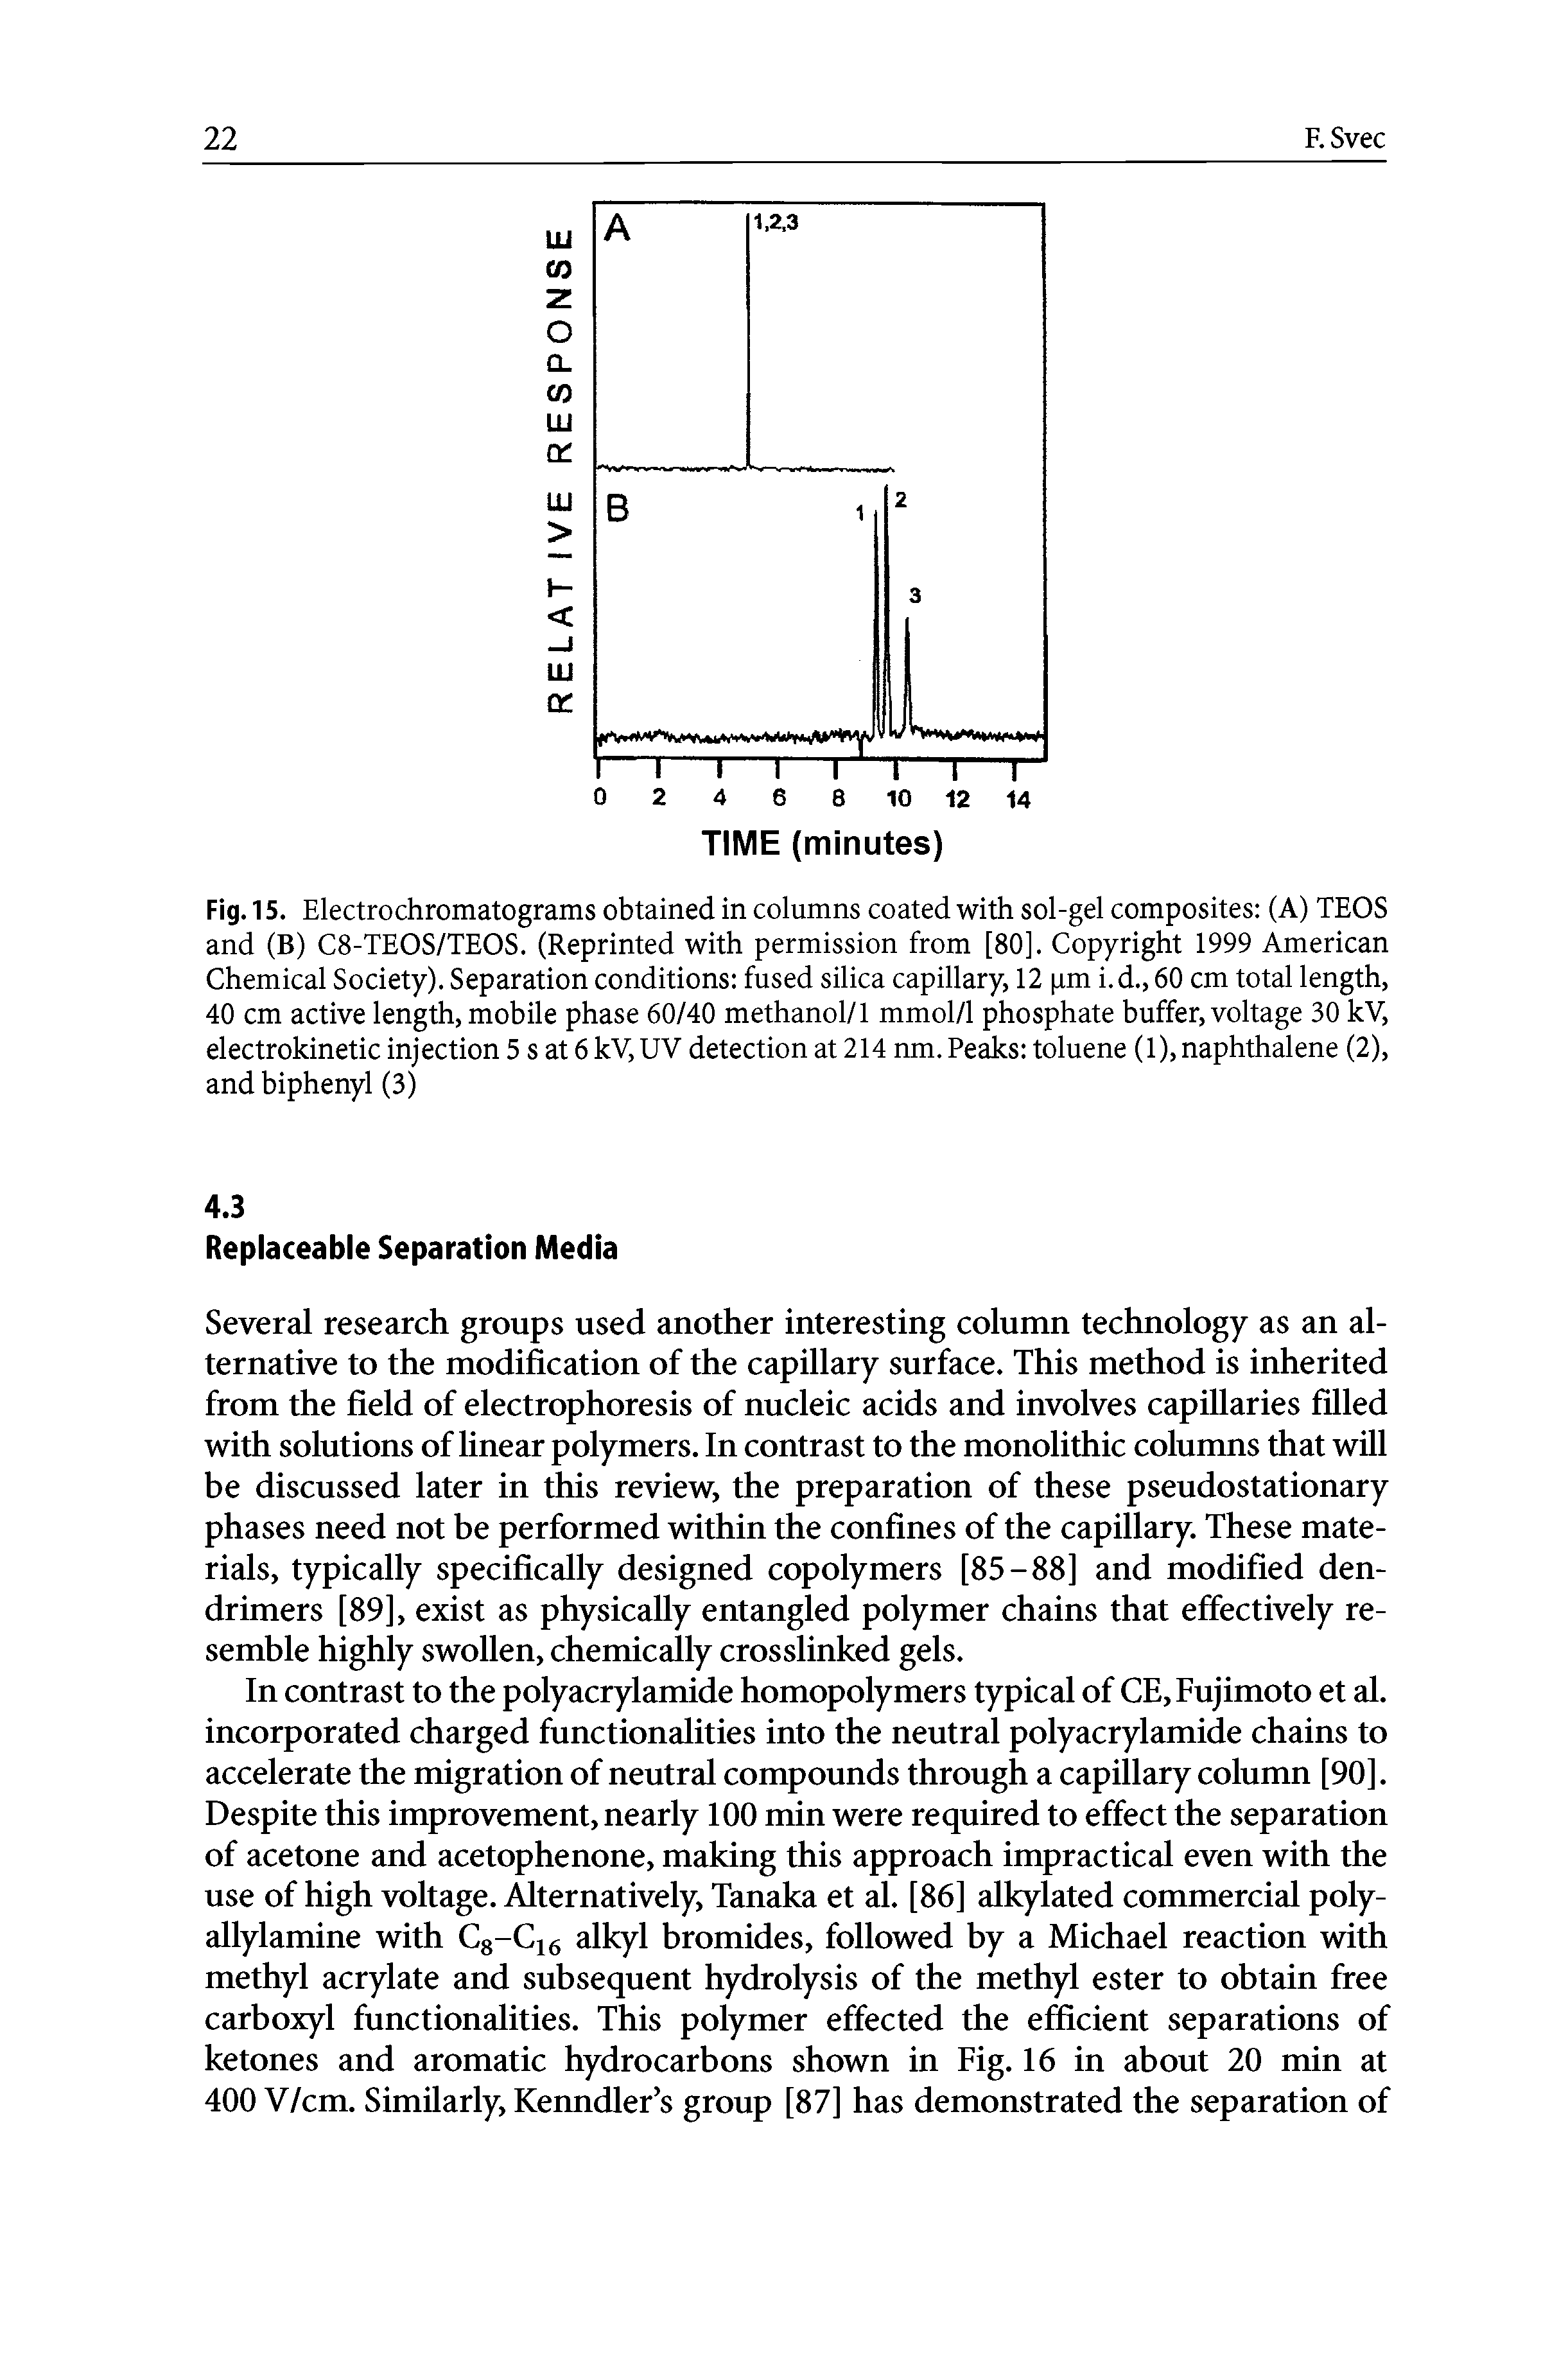 Fig. 15. Electrochromatograms obtained in columns coated with sol-gel composites (A) TEOS and (B) C8-TEOS/TEOS. (Reprinted with permission from [80]. Copyright 1999 American Chemical Society). Separation conditions fused silica capillary, 12 pm i.d., 60 cm total length, 40 cm active length, mobile phase 60/40 methanol/1 mmol/1 phosphate buffer, voltage 30 kV, electrokinetic injection 5 s at 6 kV, UV detection at 214 nm. Peaks toluene (1), naphthalene (2), and biphenyl (3)...